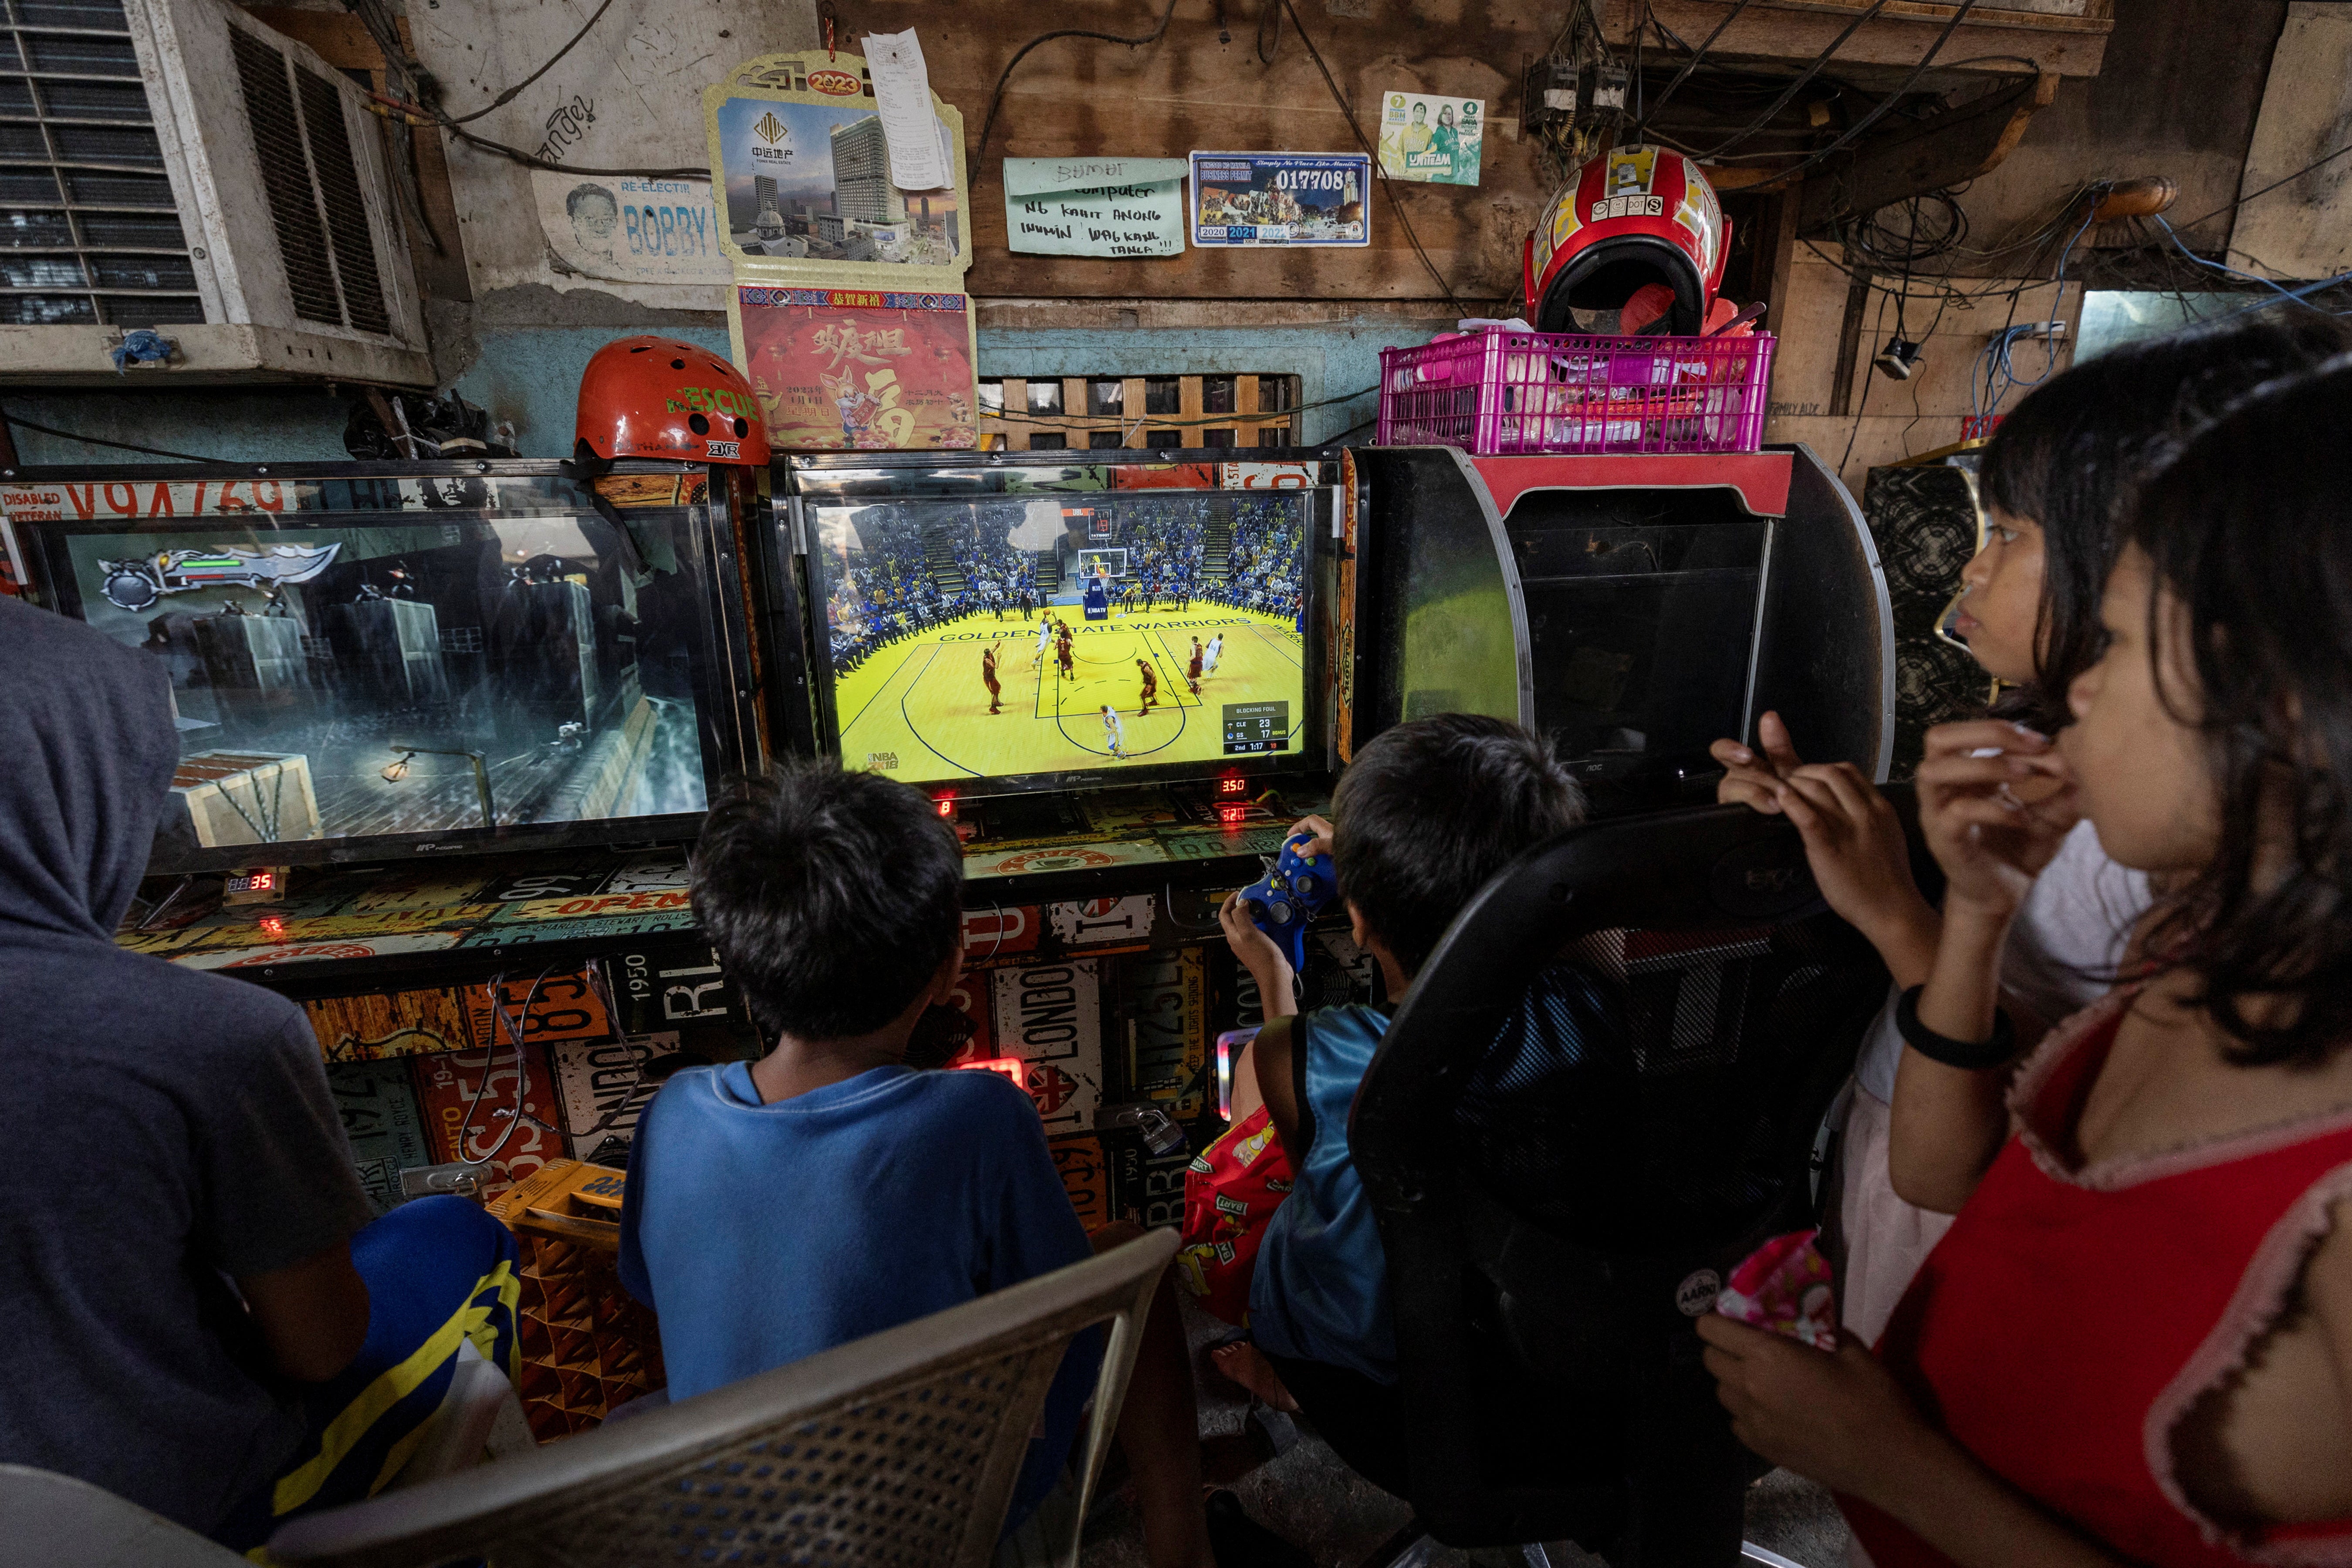 Children play ‘NBA 2K’, a basketball video game, at an internet vending machine known in the Philippines as a pisonet, in Tondo, Manila